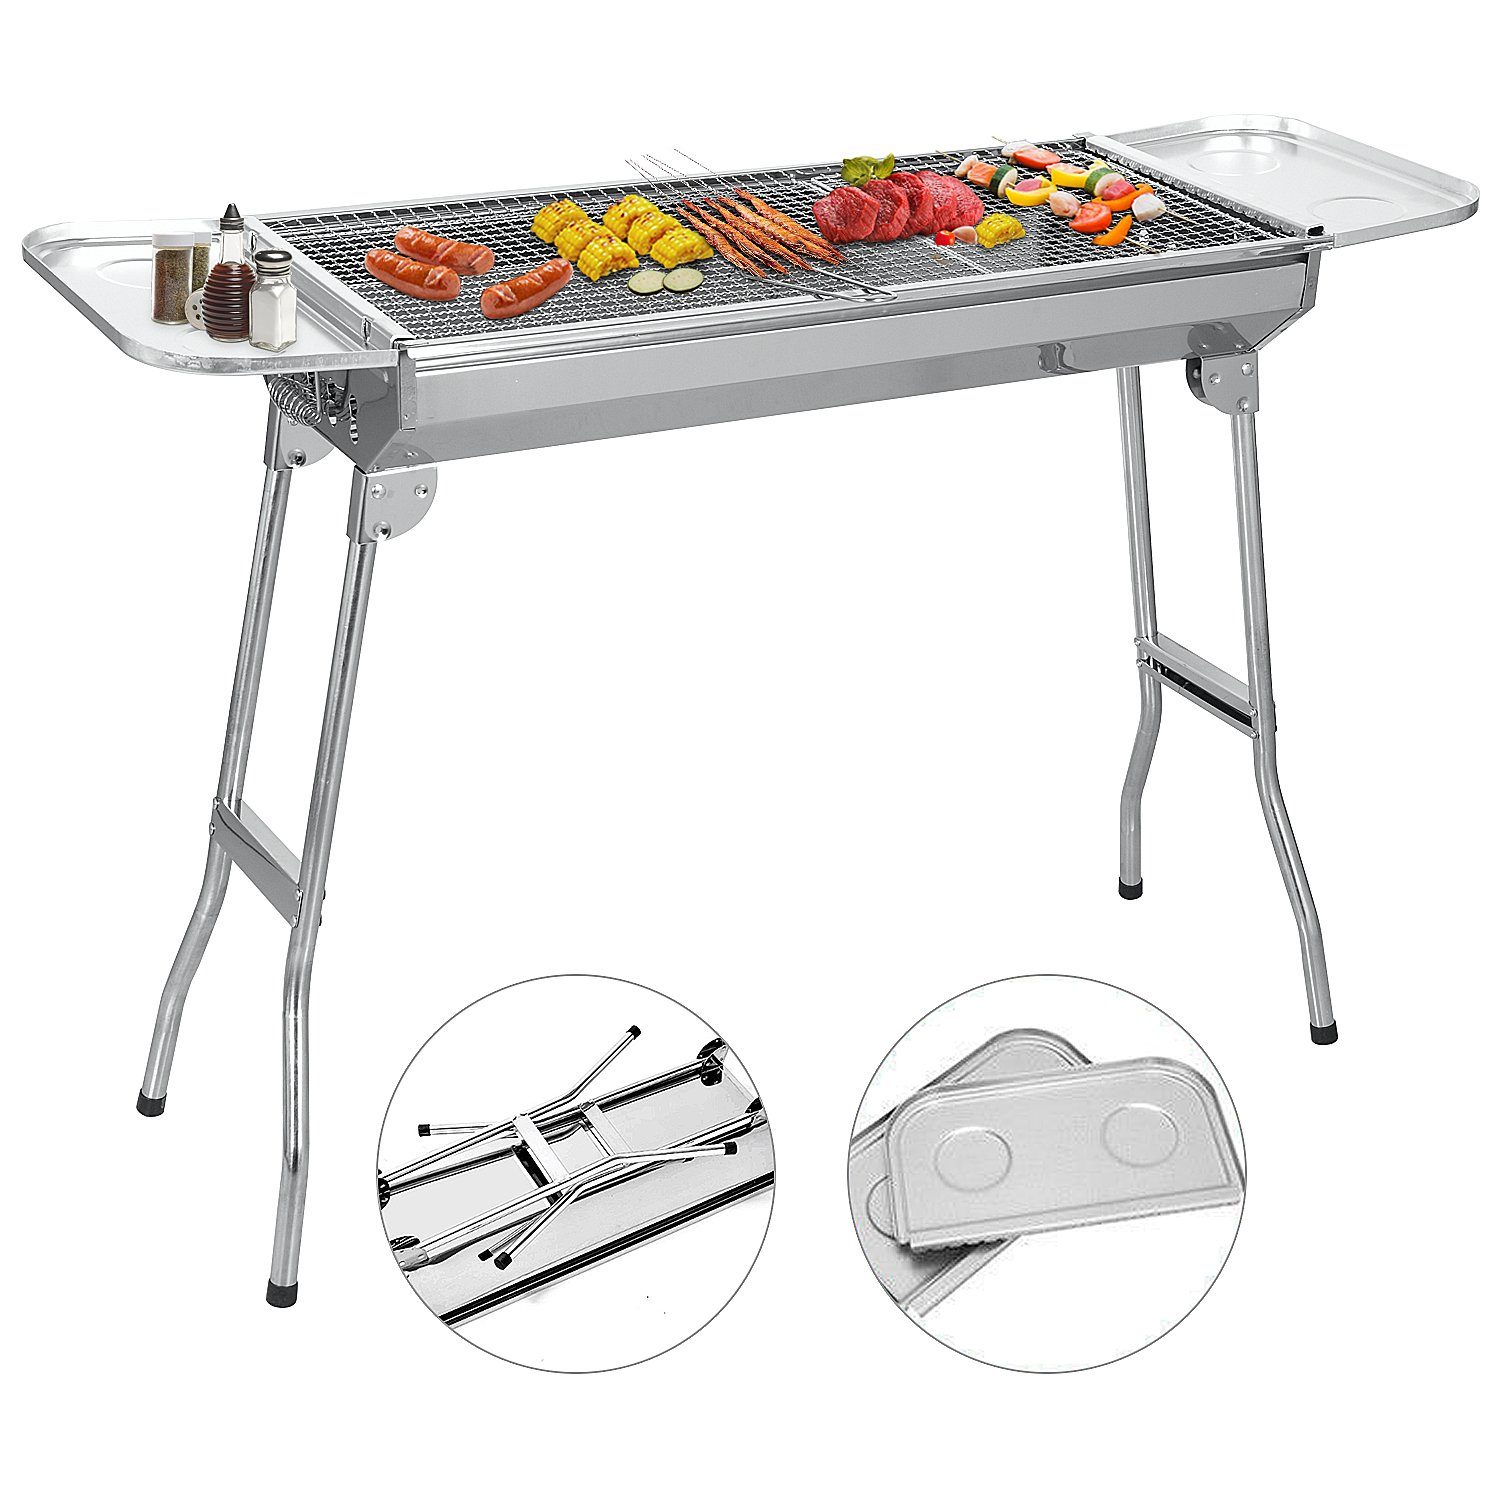 BBQ Edelstahl Holzkohlegrill Klappgrill Standgrill Tragbar Camping Grill Outdoor 